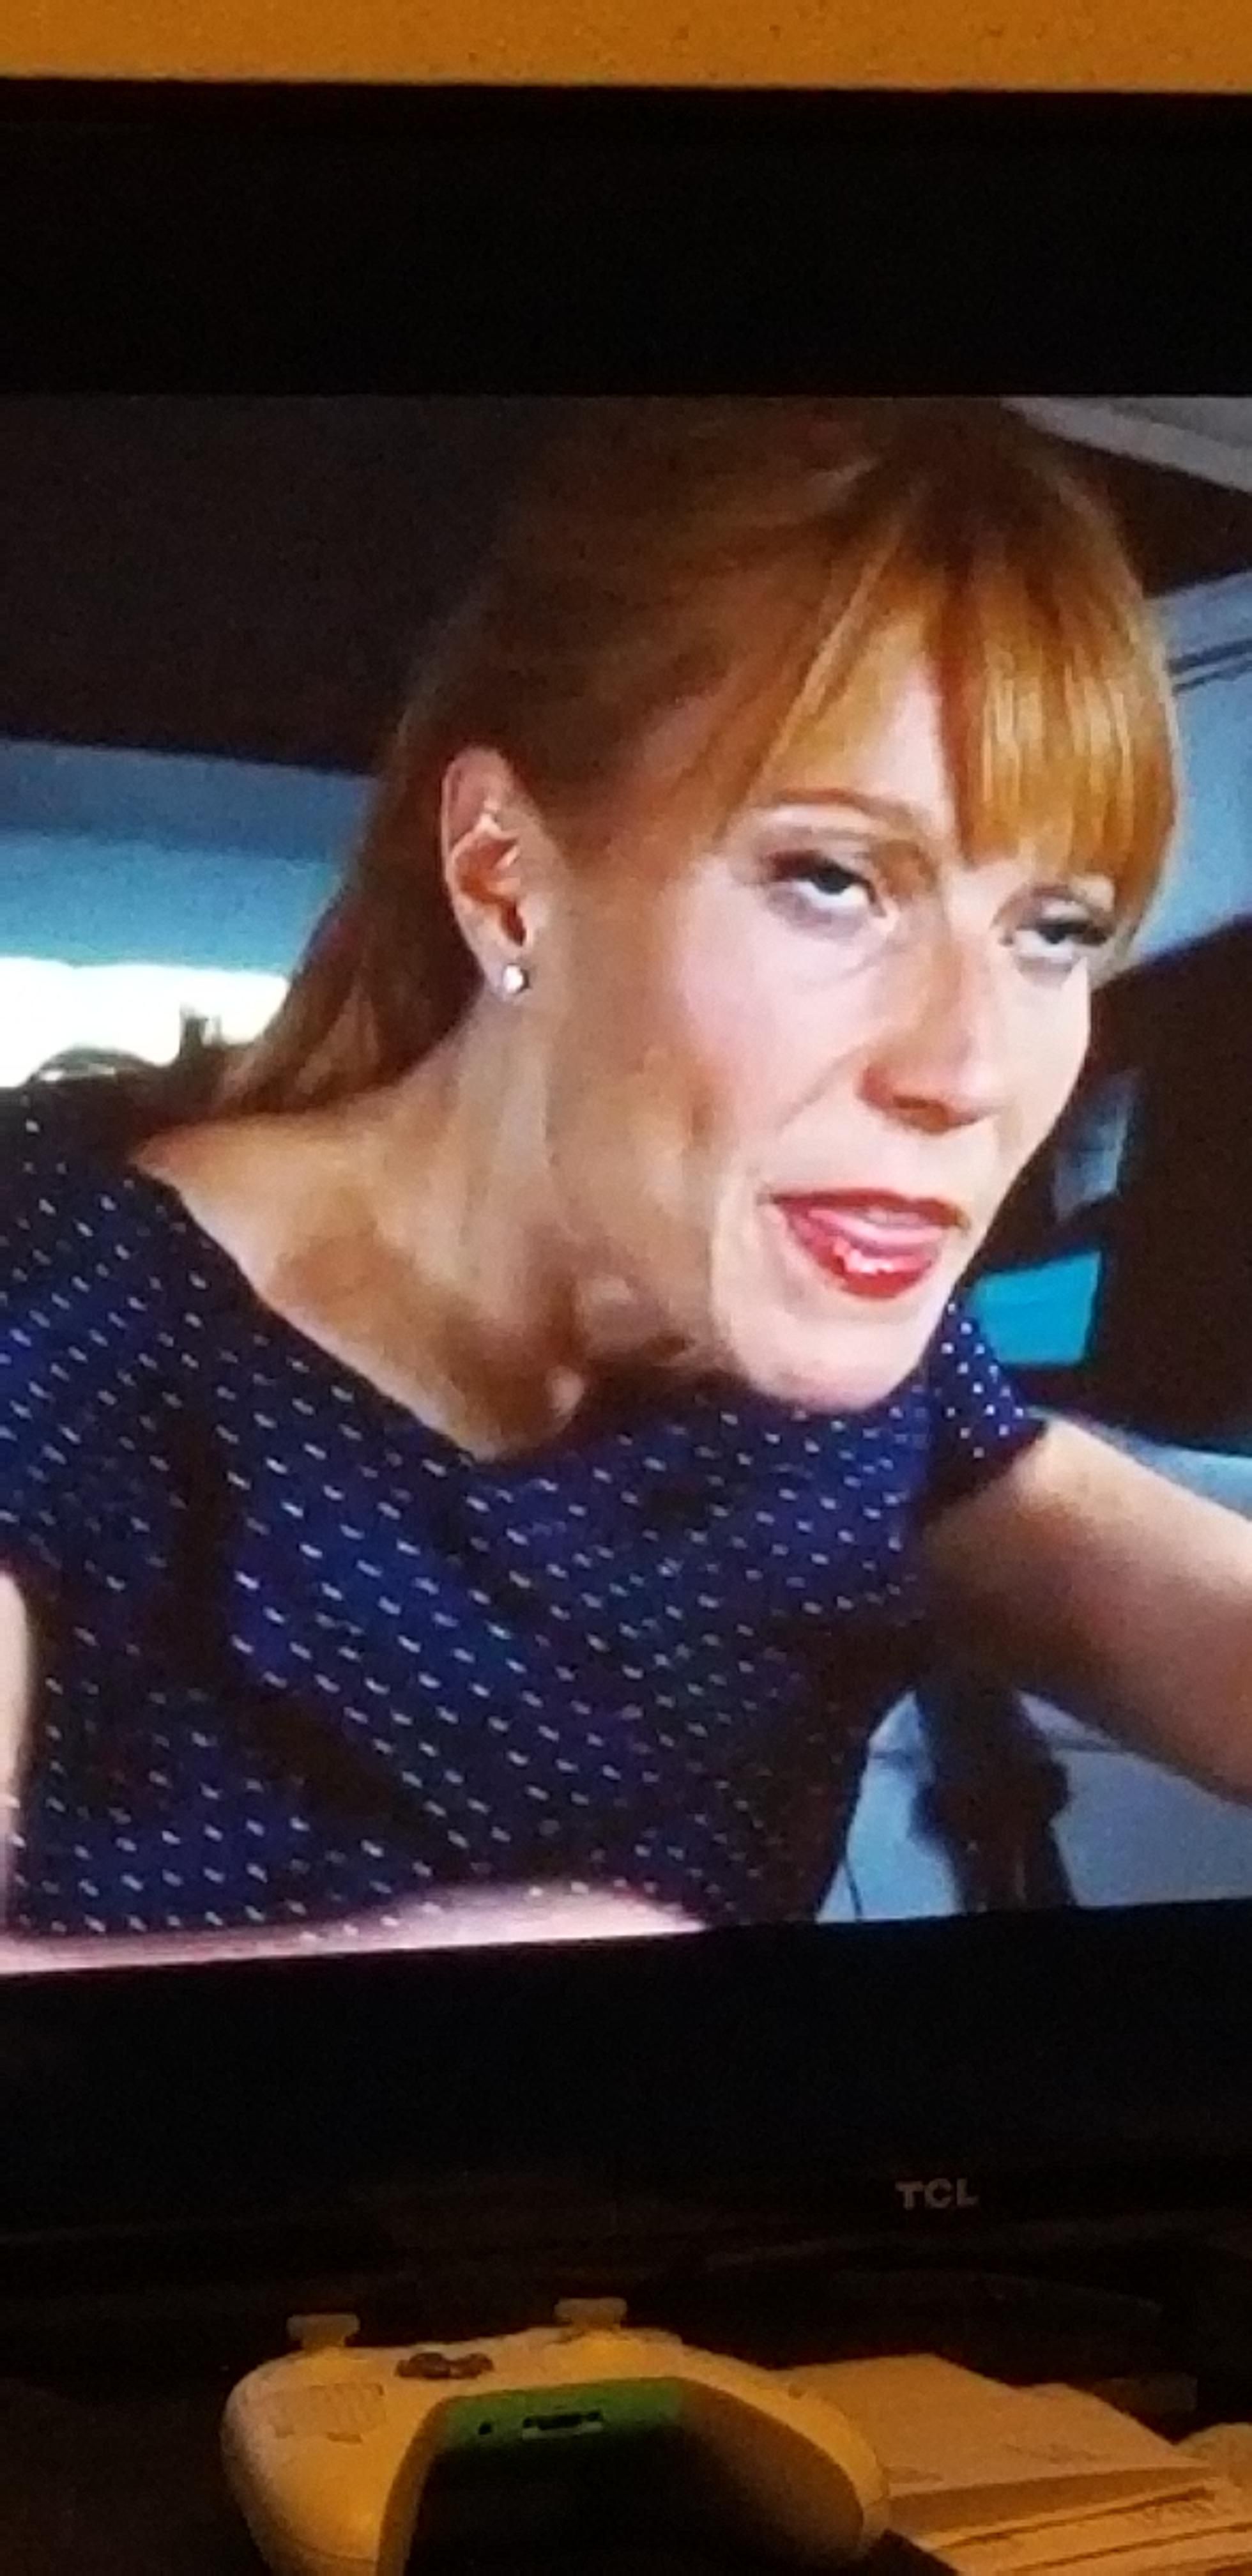 Paused Iron Man 2 at the right time.